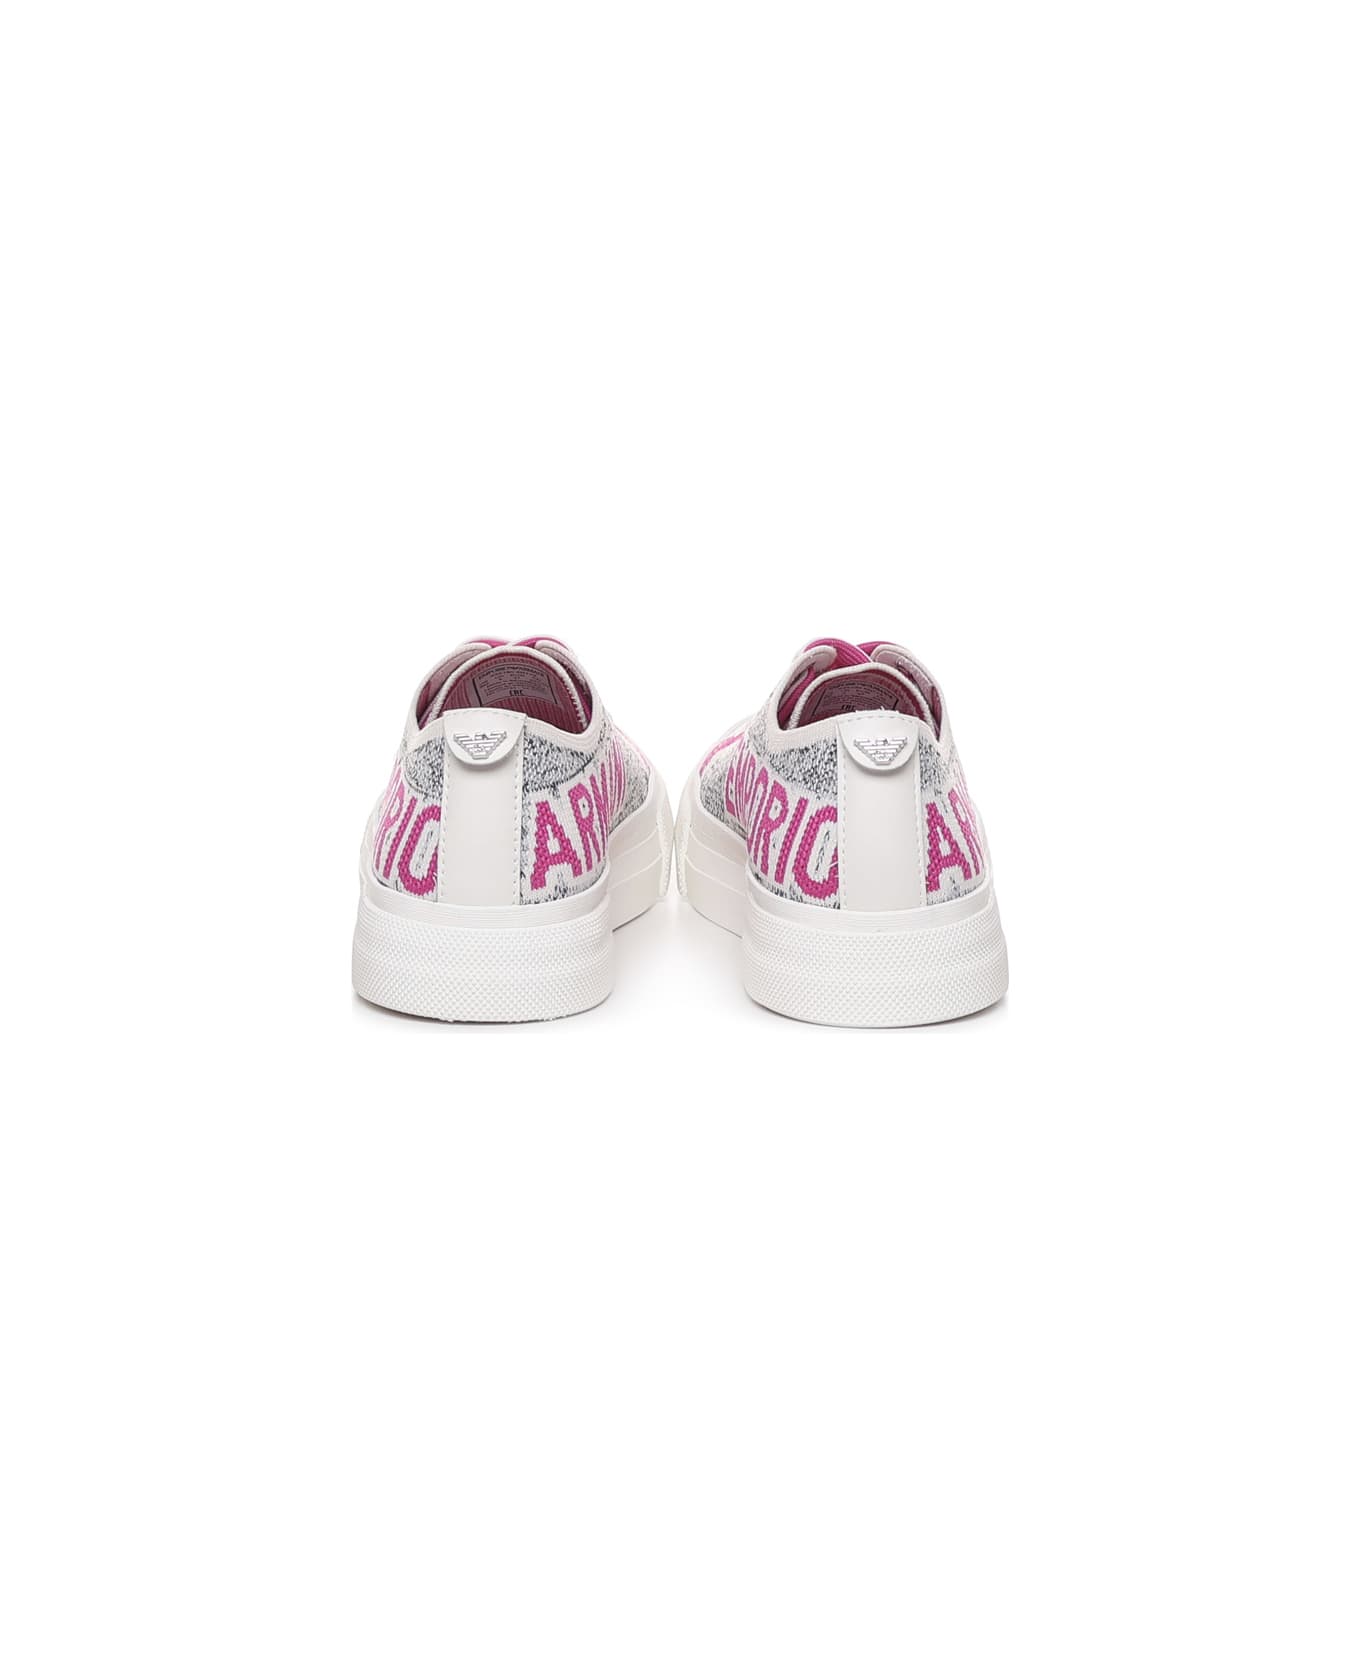 Emporio Armani Sneakers With Print - Off white+pink